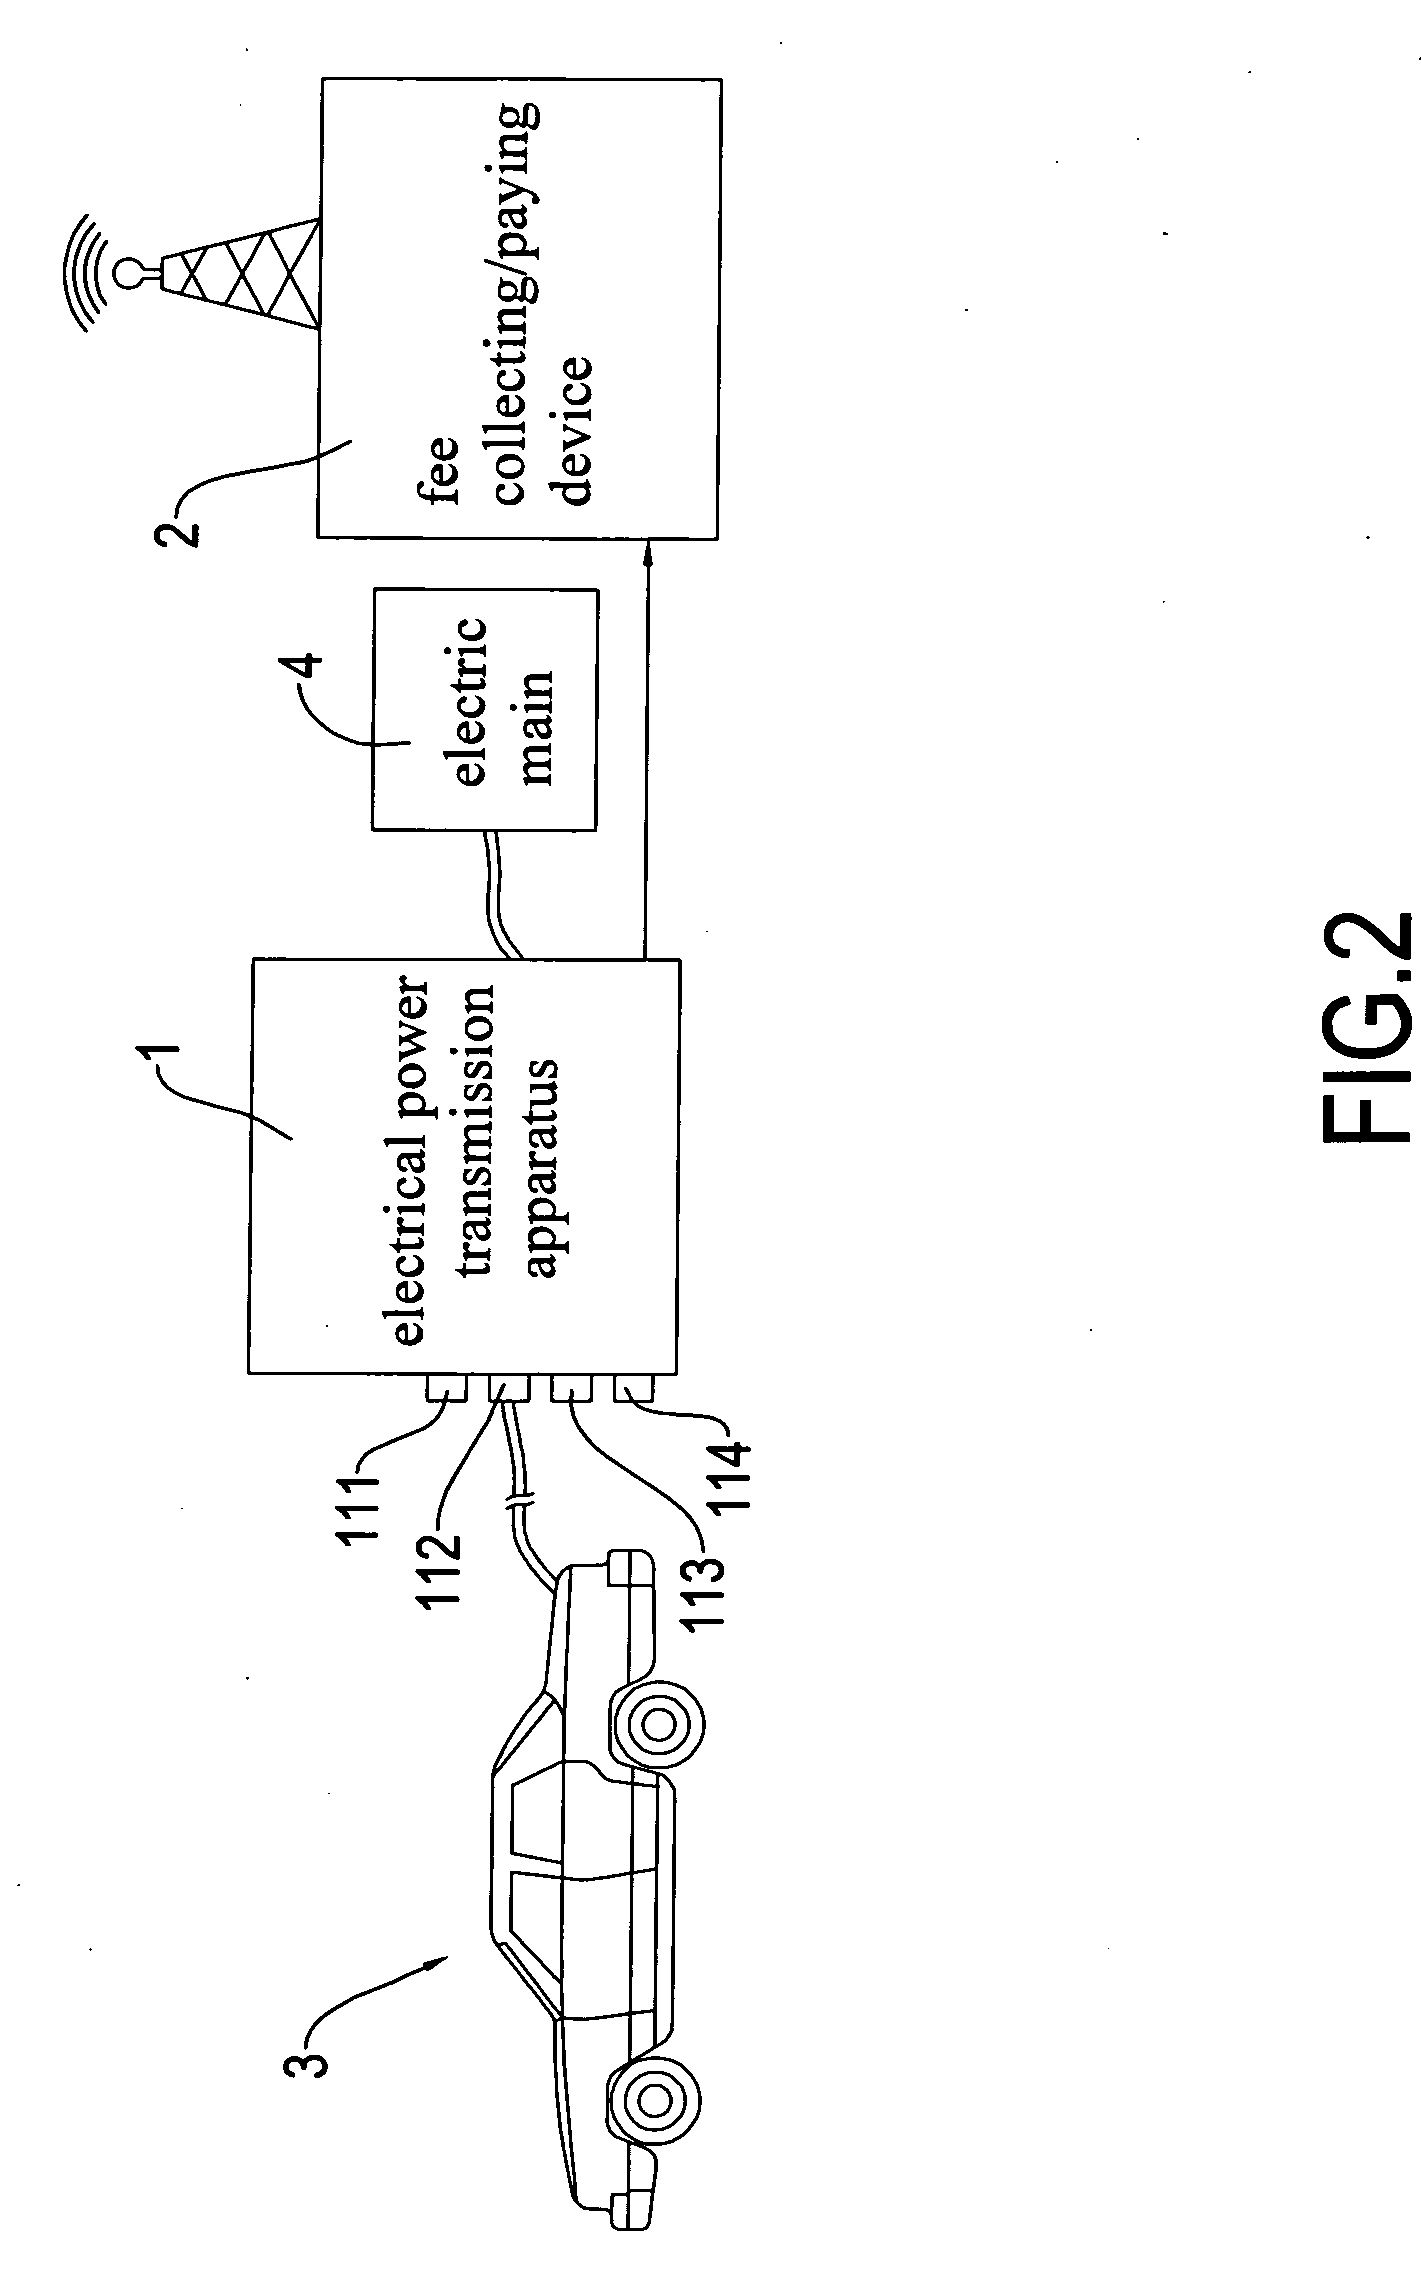 Electrical power transmission apparatus